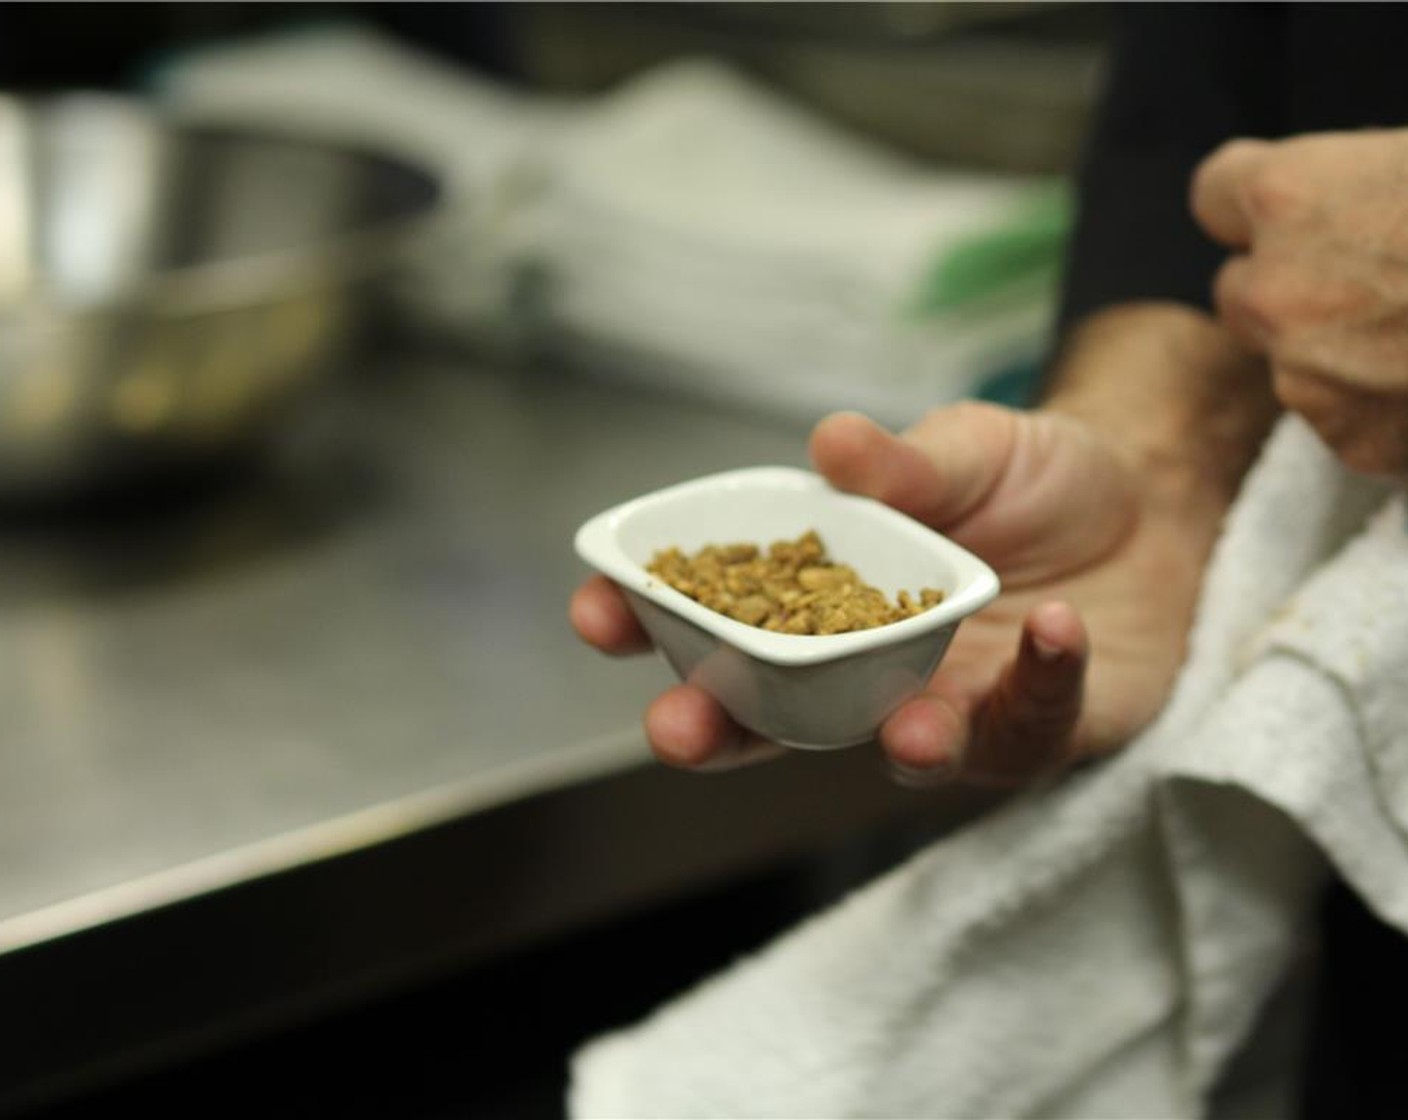 step 5 When sugar takes on a “granola” like look and feel remove from fire immediately onto a paper lined plate and allow to cool at room temperature, never refrigerate.